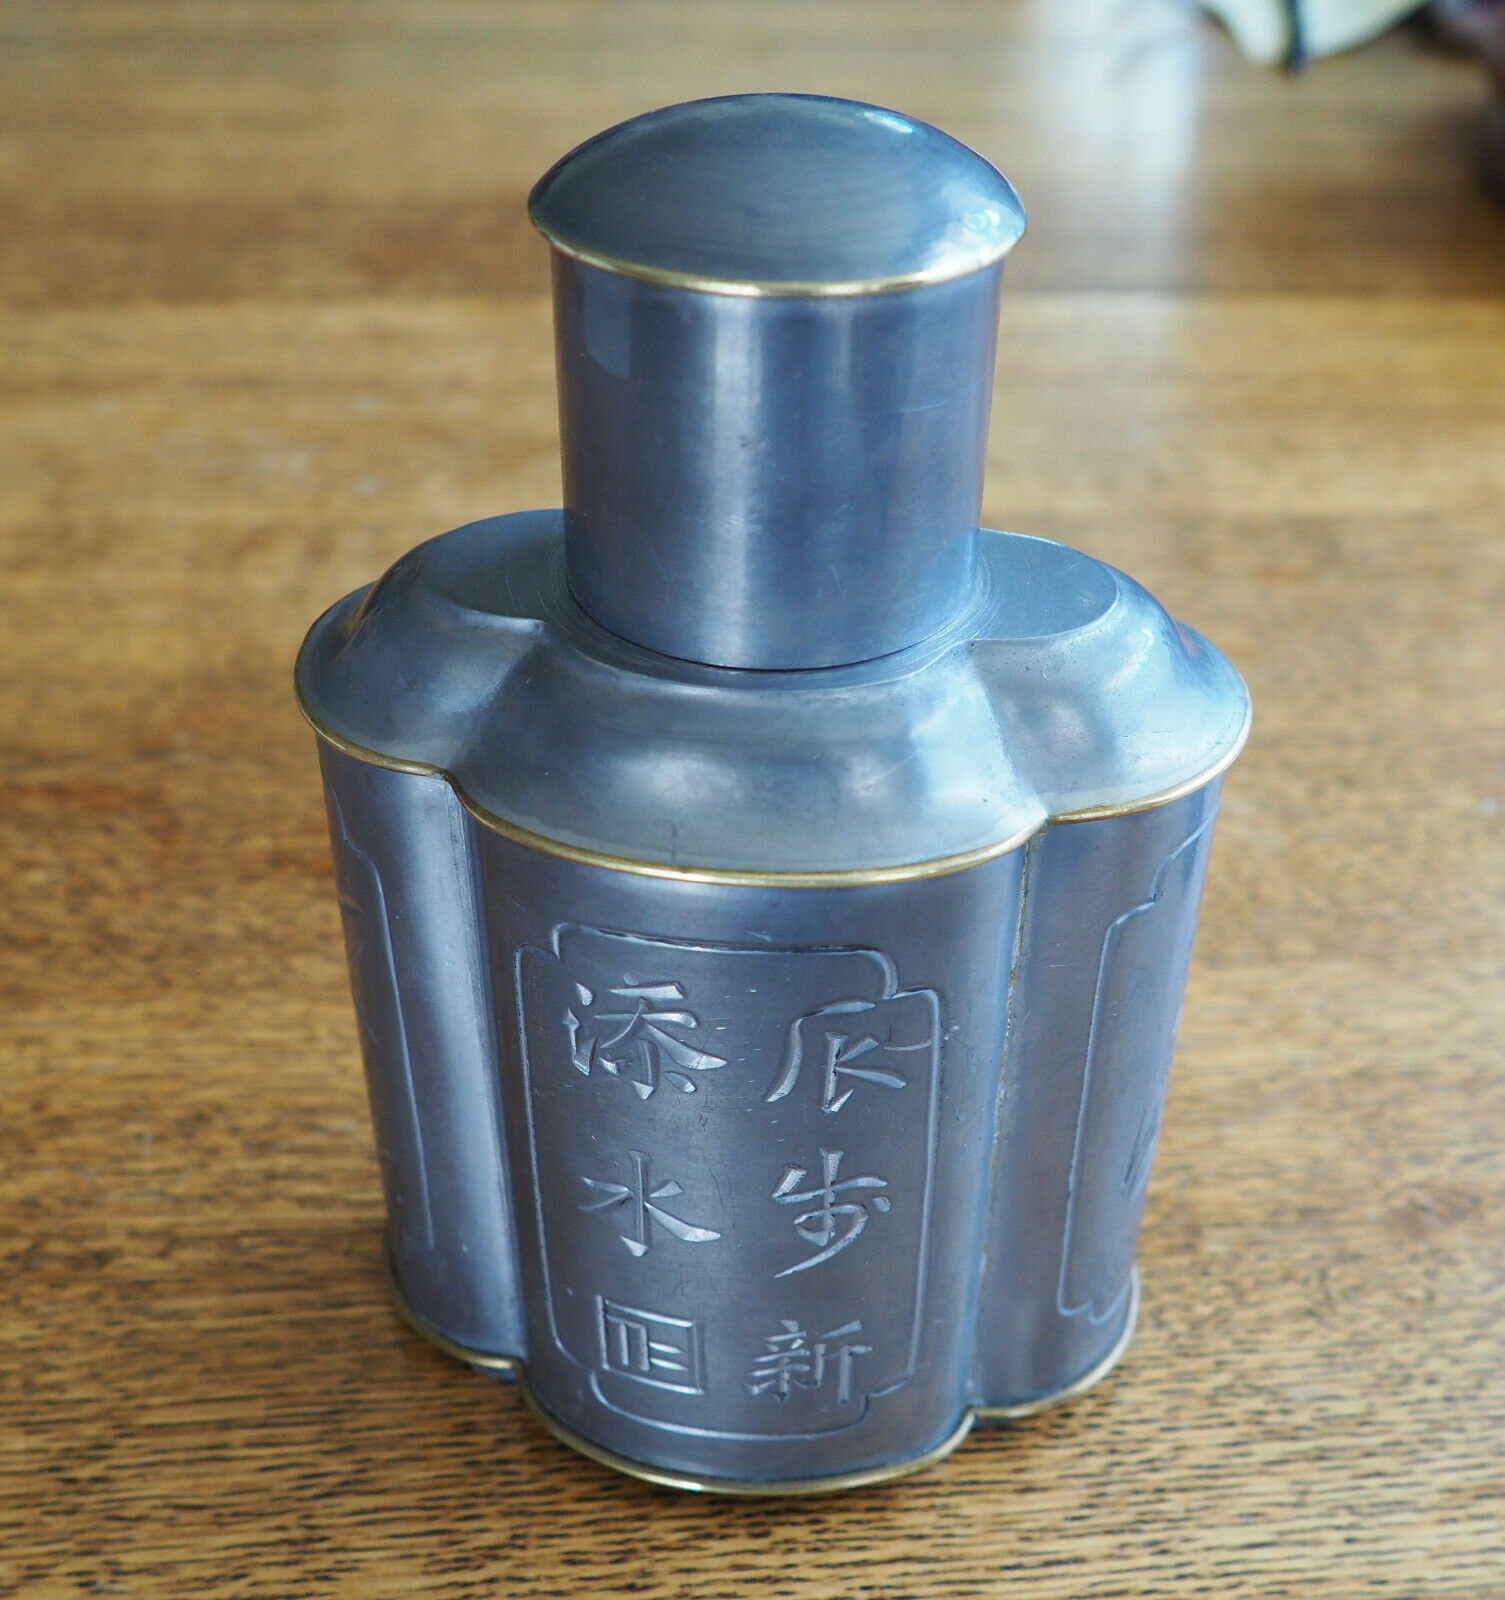 Antique Chinese Brass & Pewter Tea Caddy - Very nice!